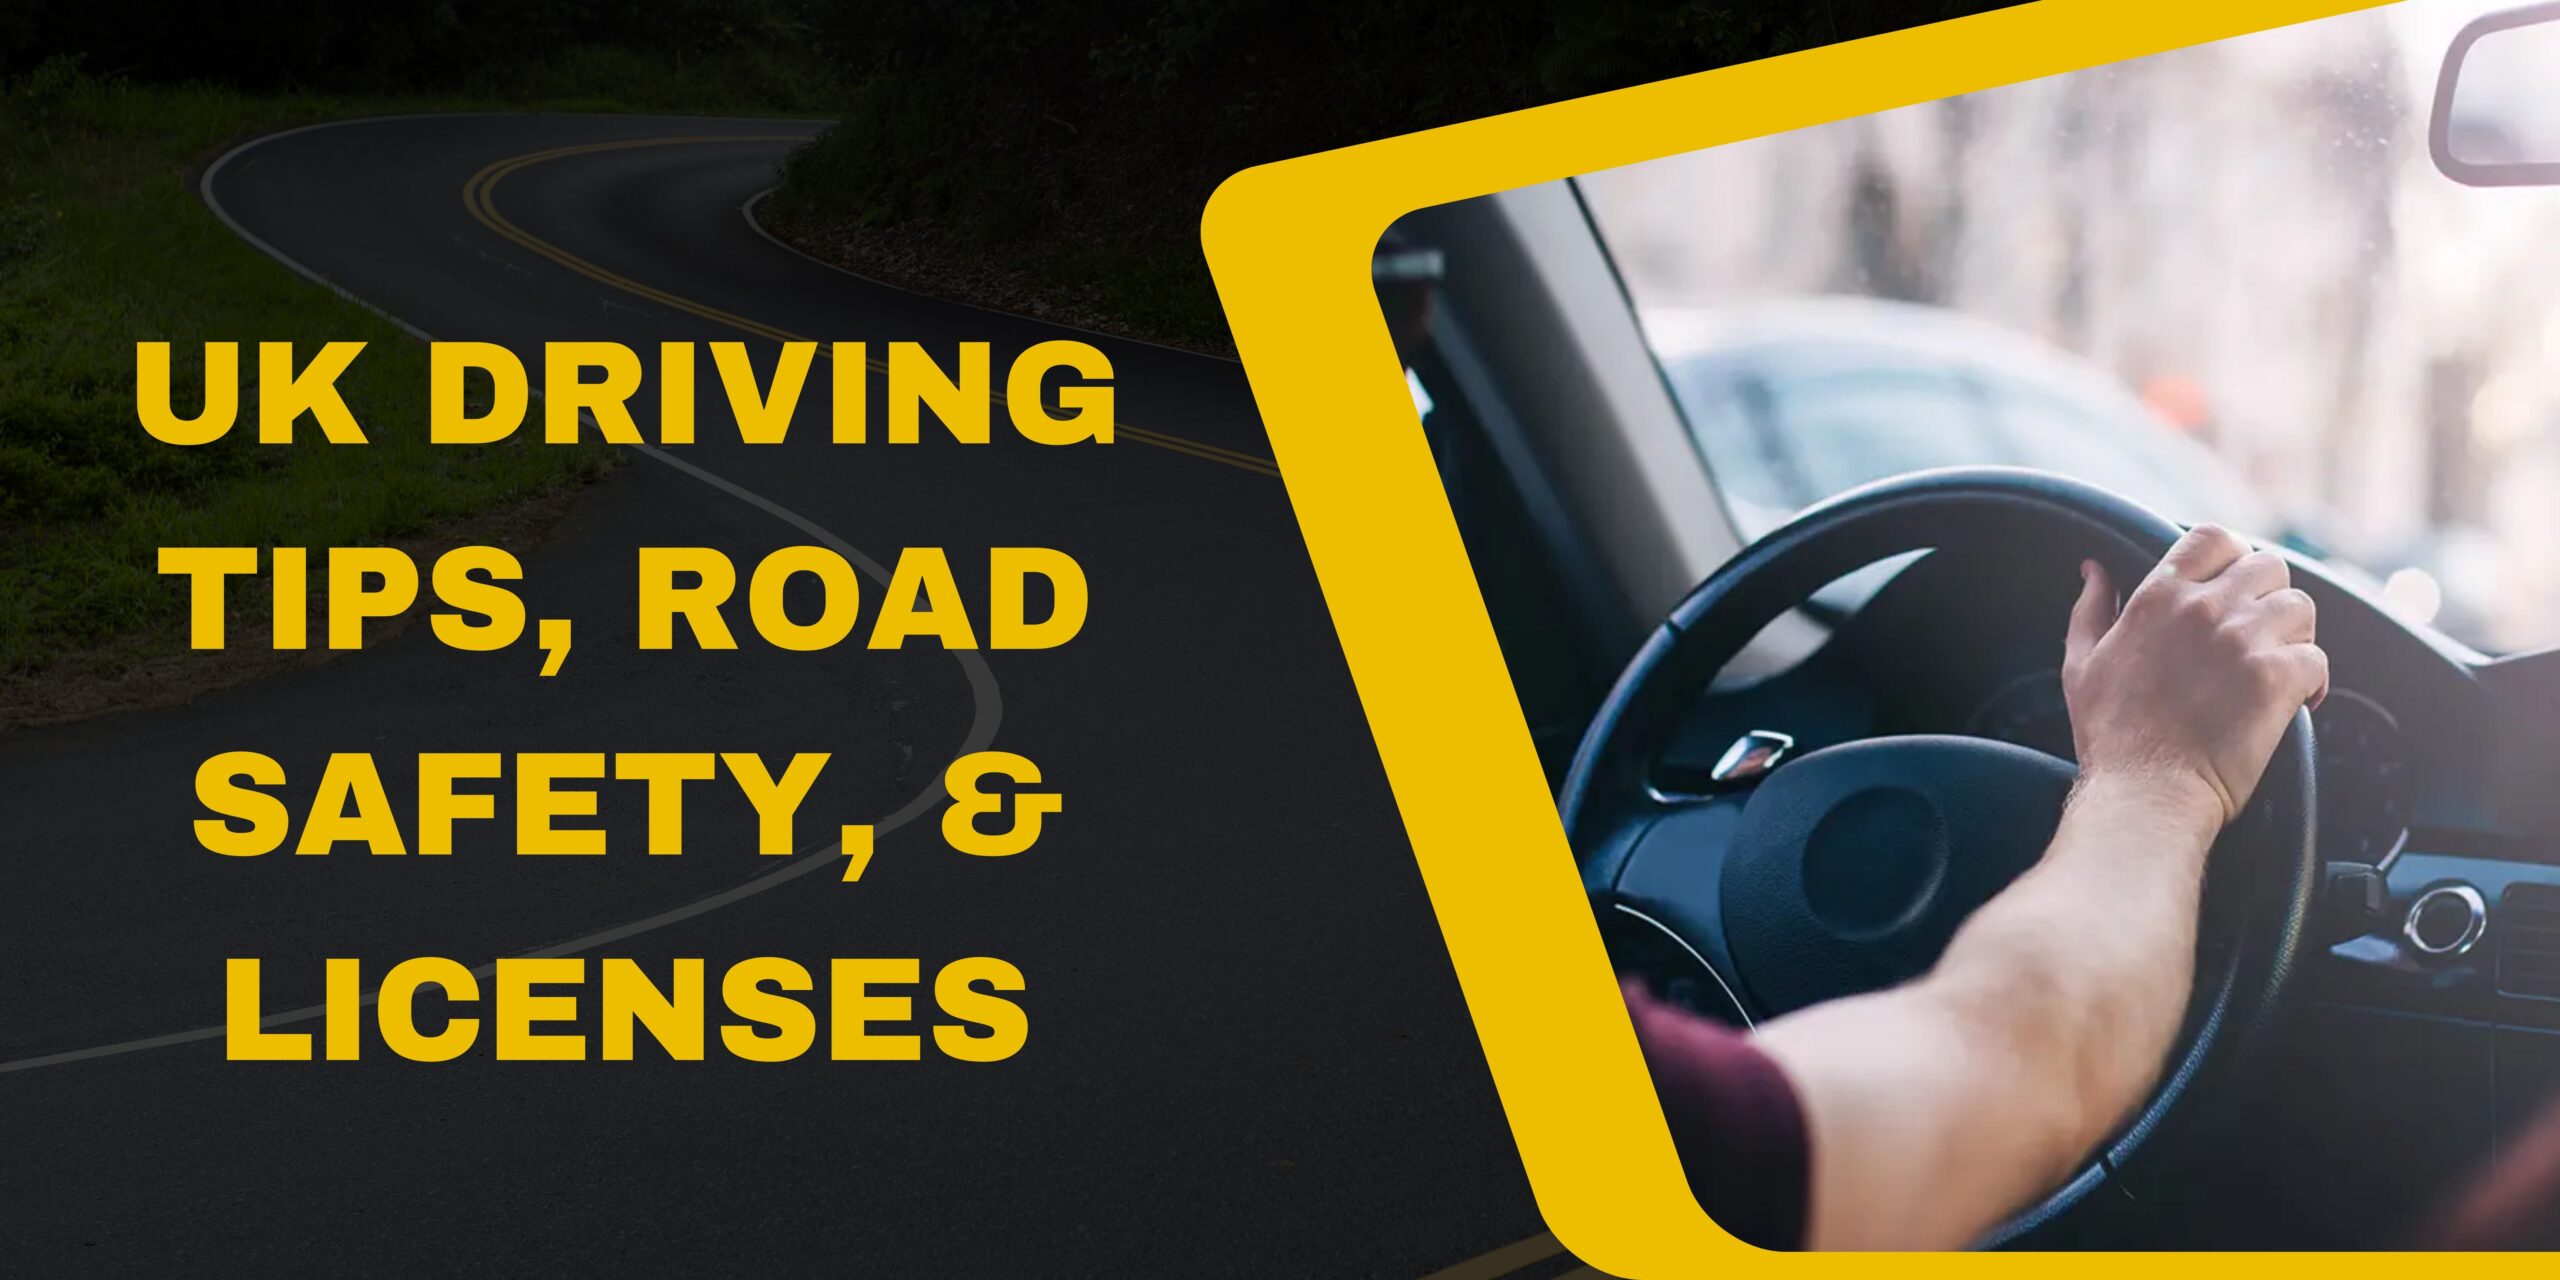 UK Driving Tips, Road Safety, & Licenses